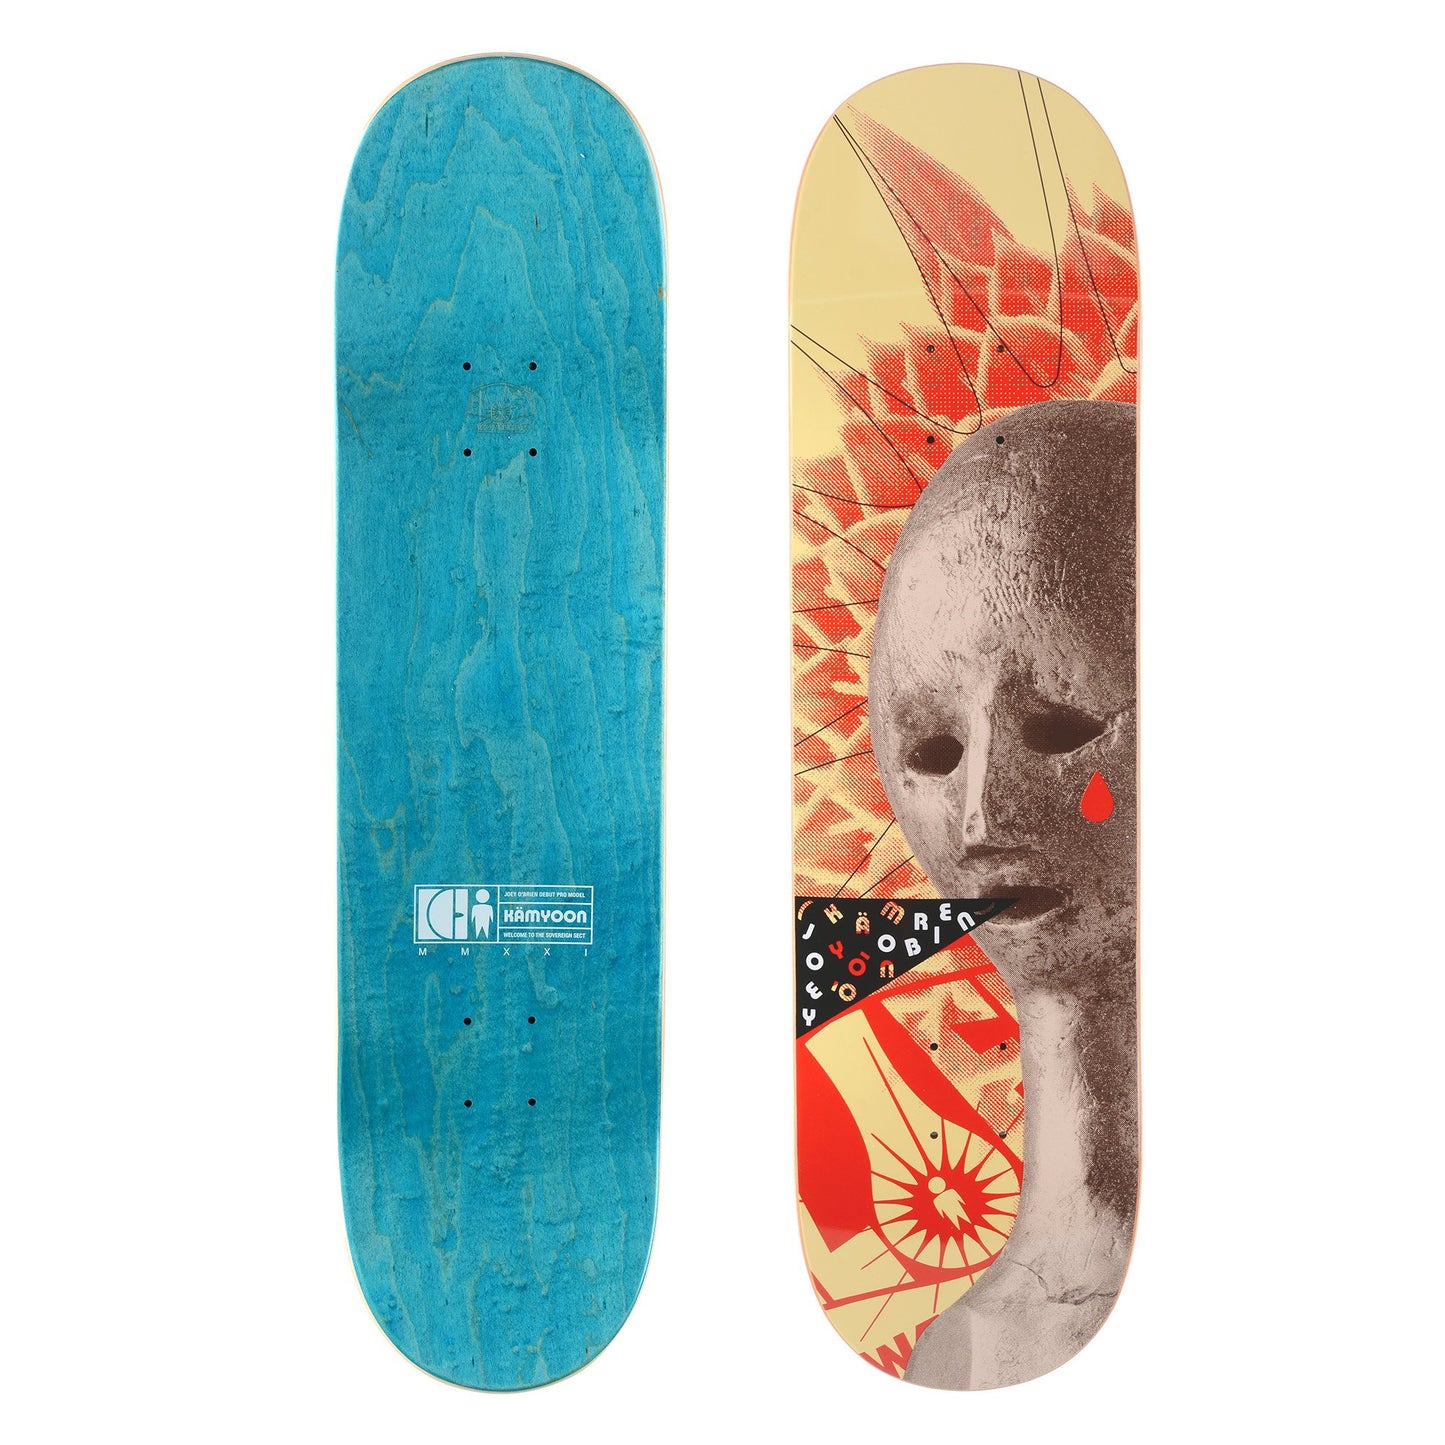 Joey O'Brien Debut Pro Deck (size options listed)